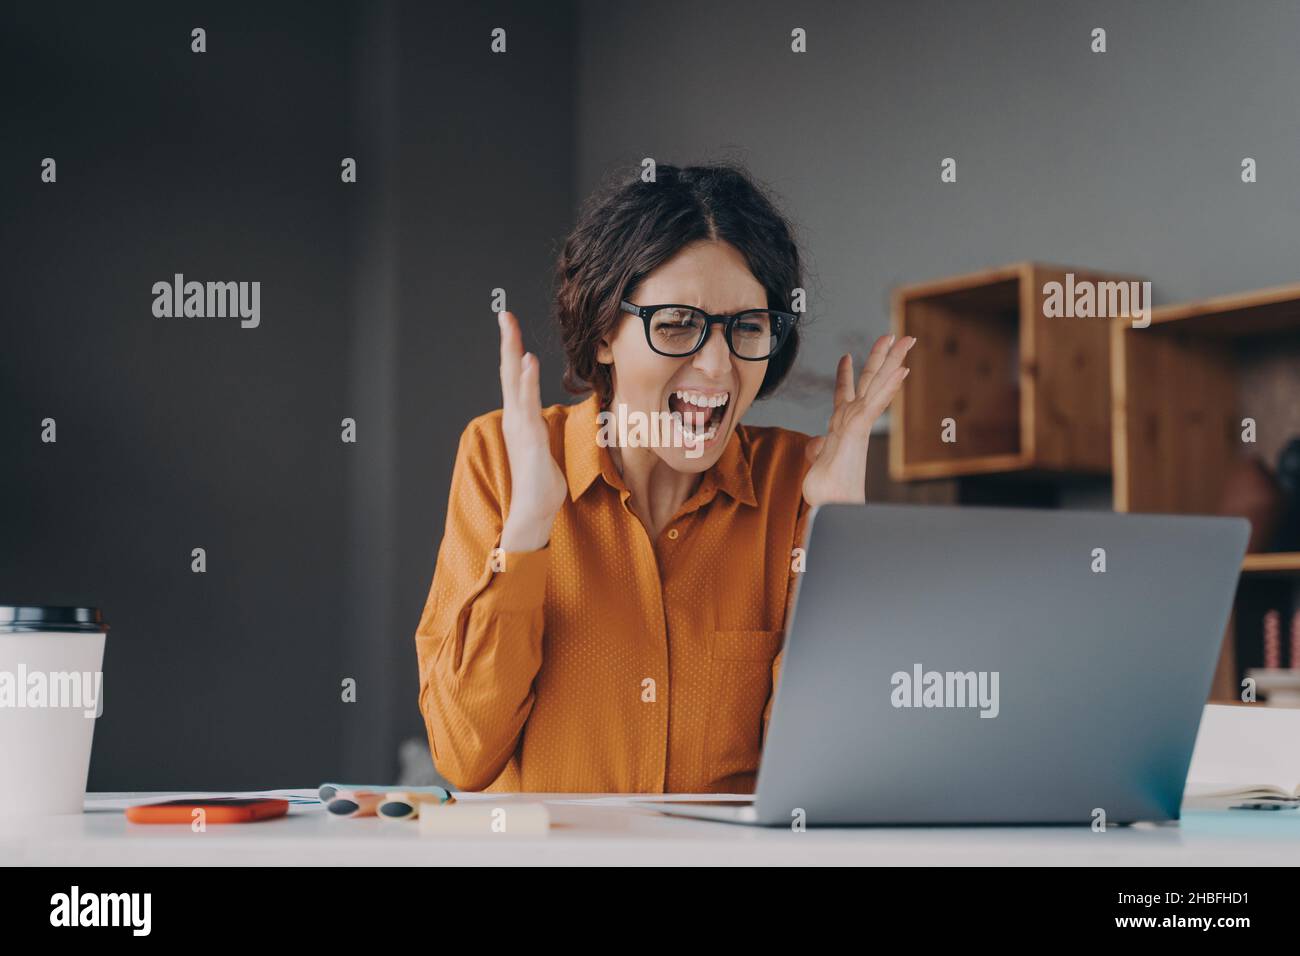 Mad Italian businesswoman shouting in distress from hopelessness while working online on laptop Stock Photo